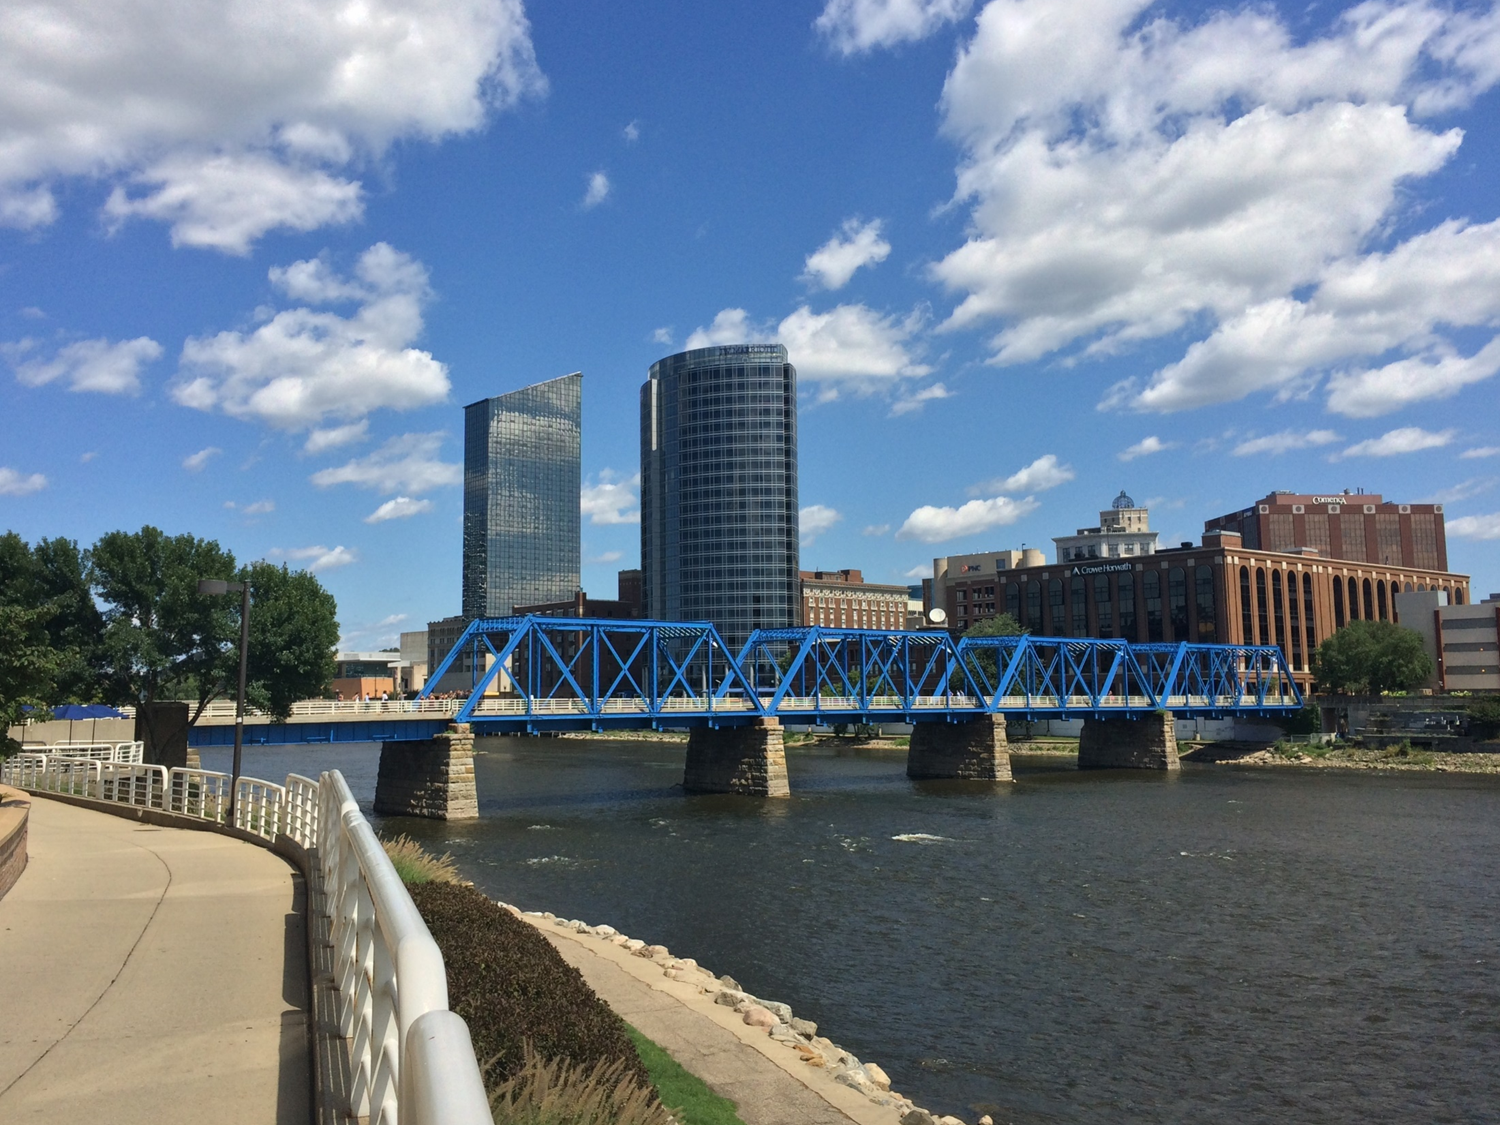 Image Credit: Blue Bridge Downtown Grand Rapids by Steven Depolo via Flickr (CC BY 2.0)